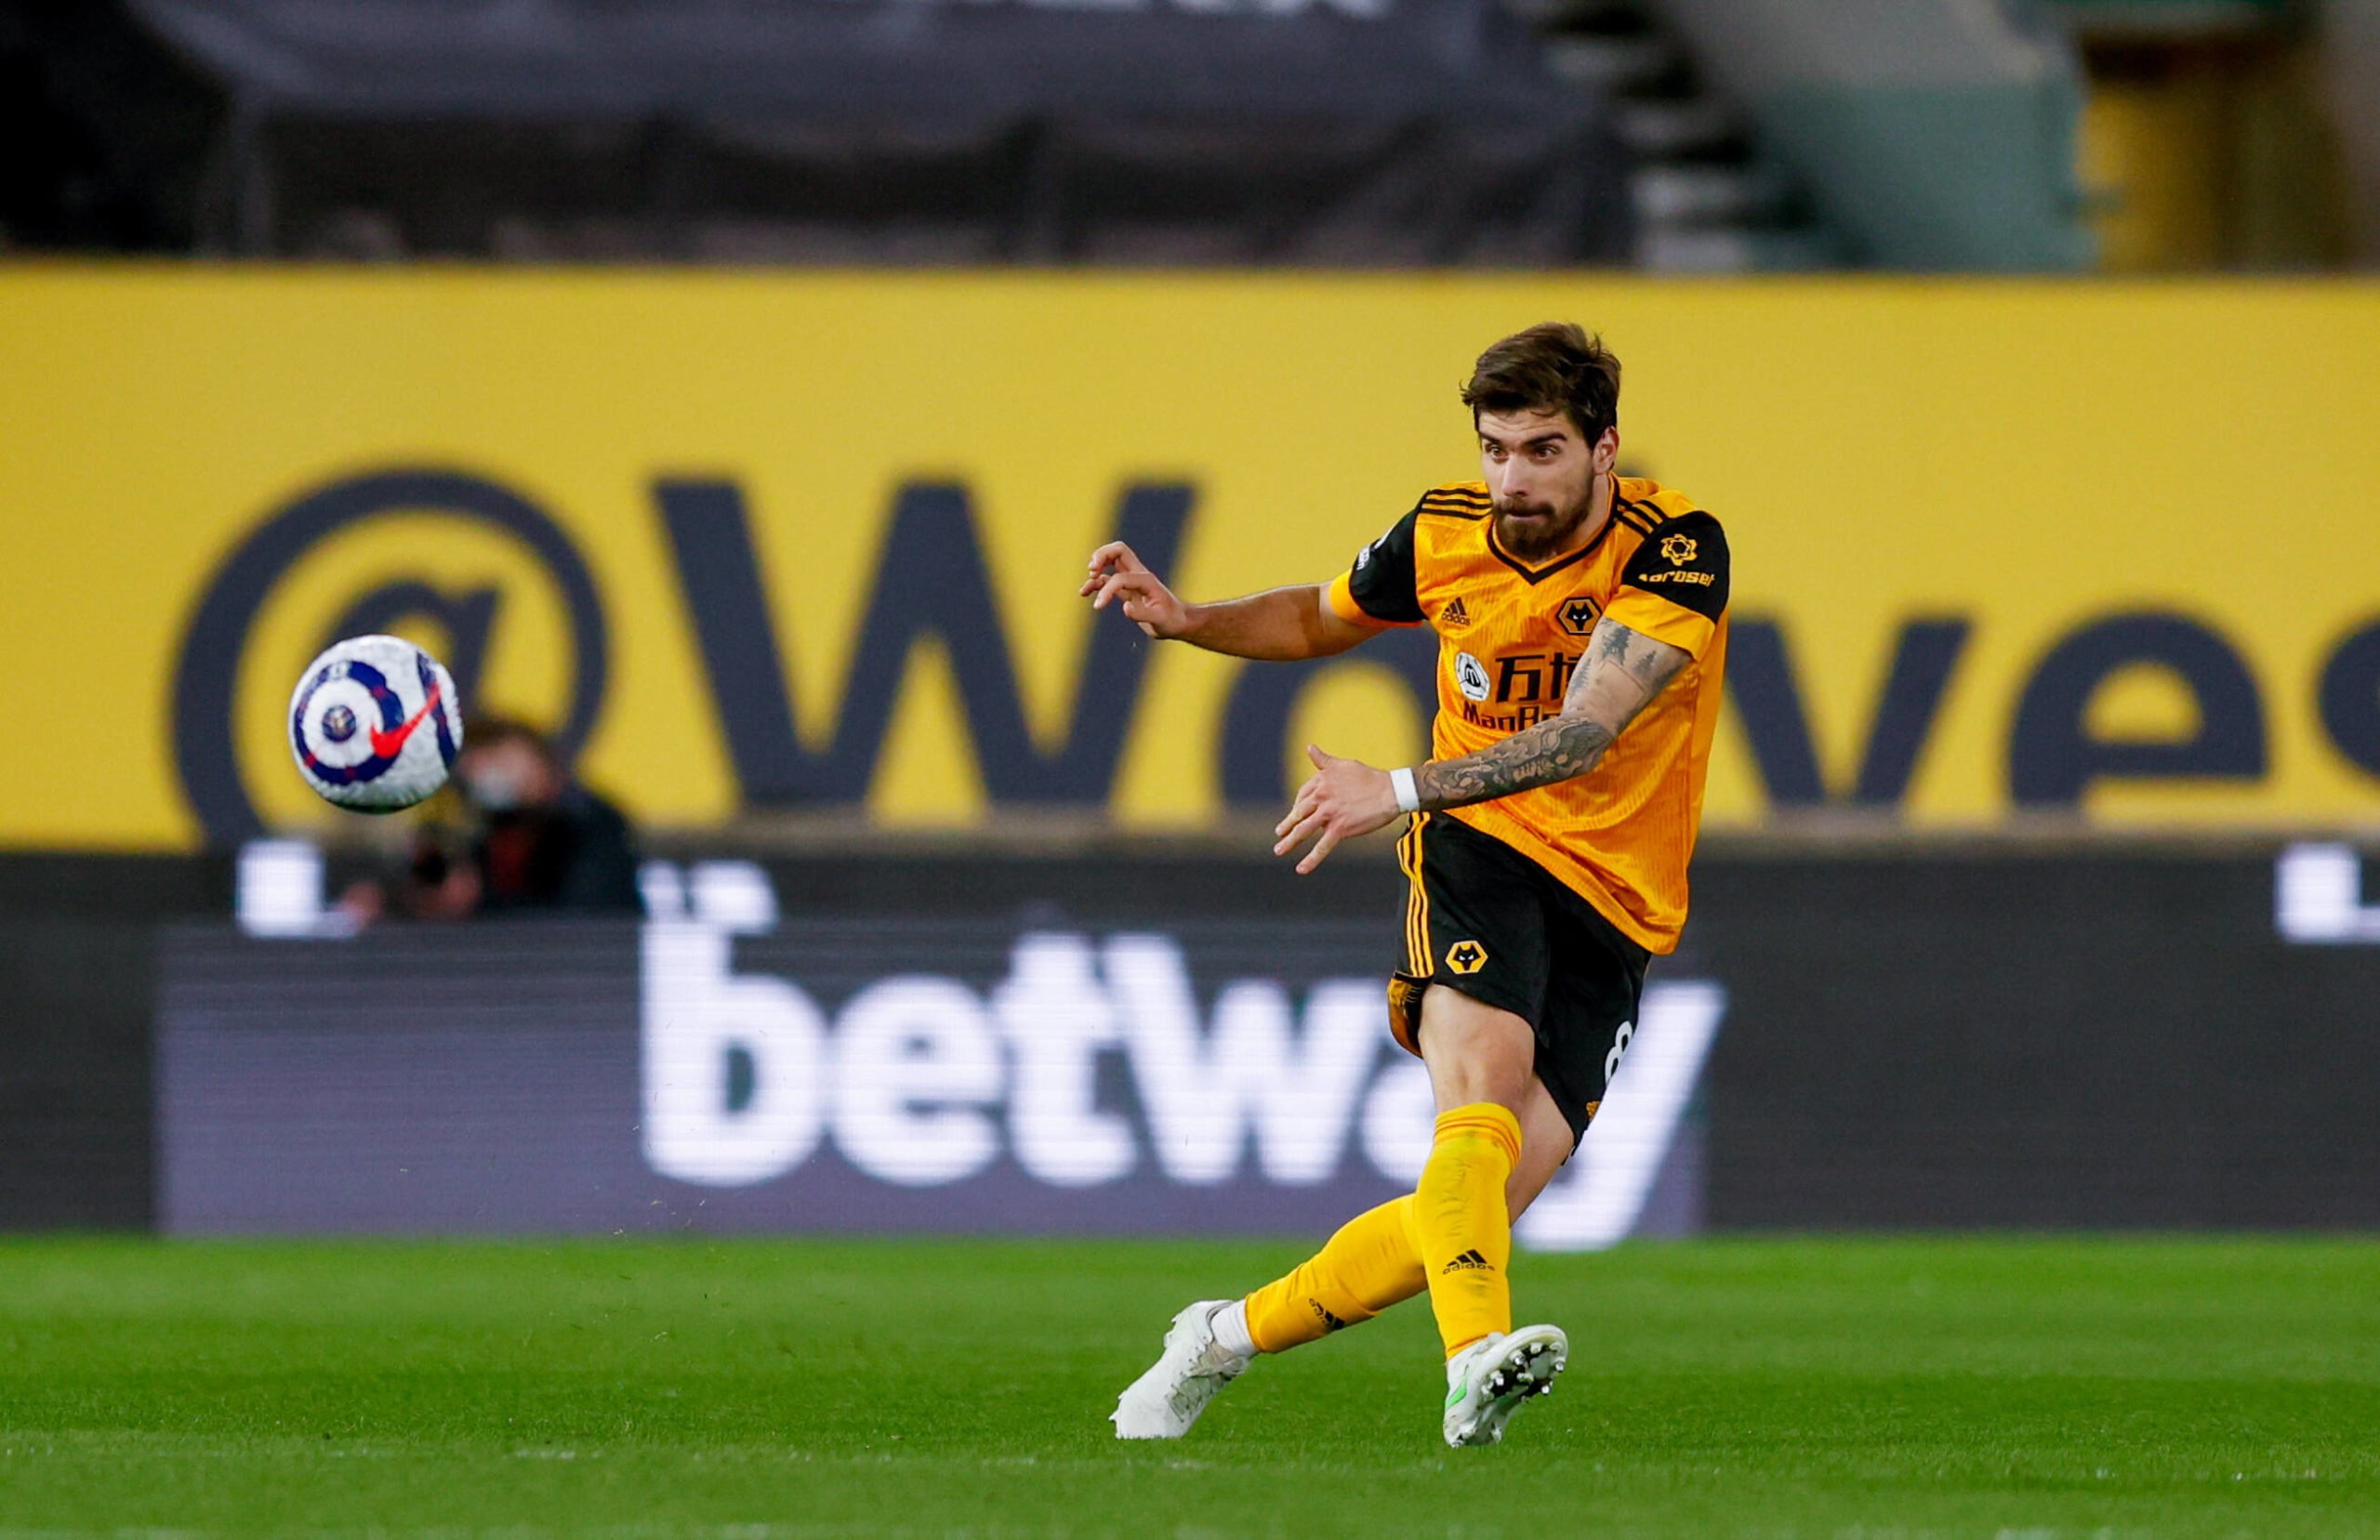 Wolves were willing to let Ruben Neves leave last summer (Neves is seen in the picture)